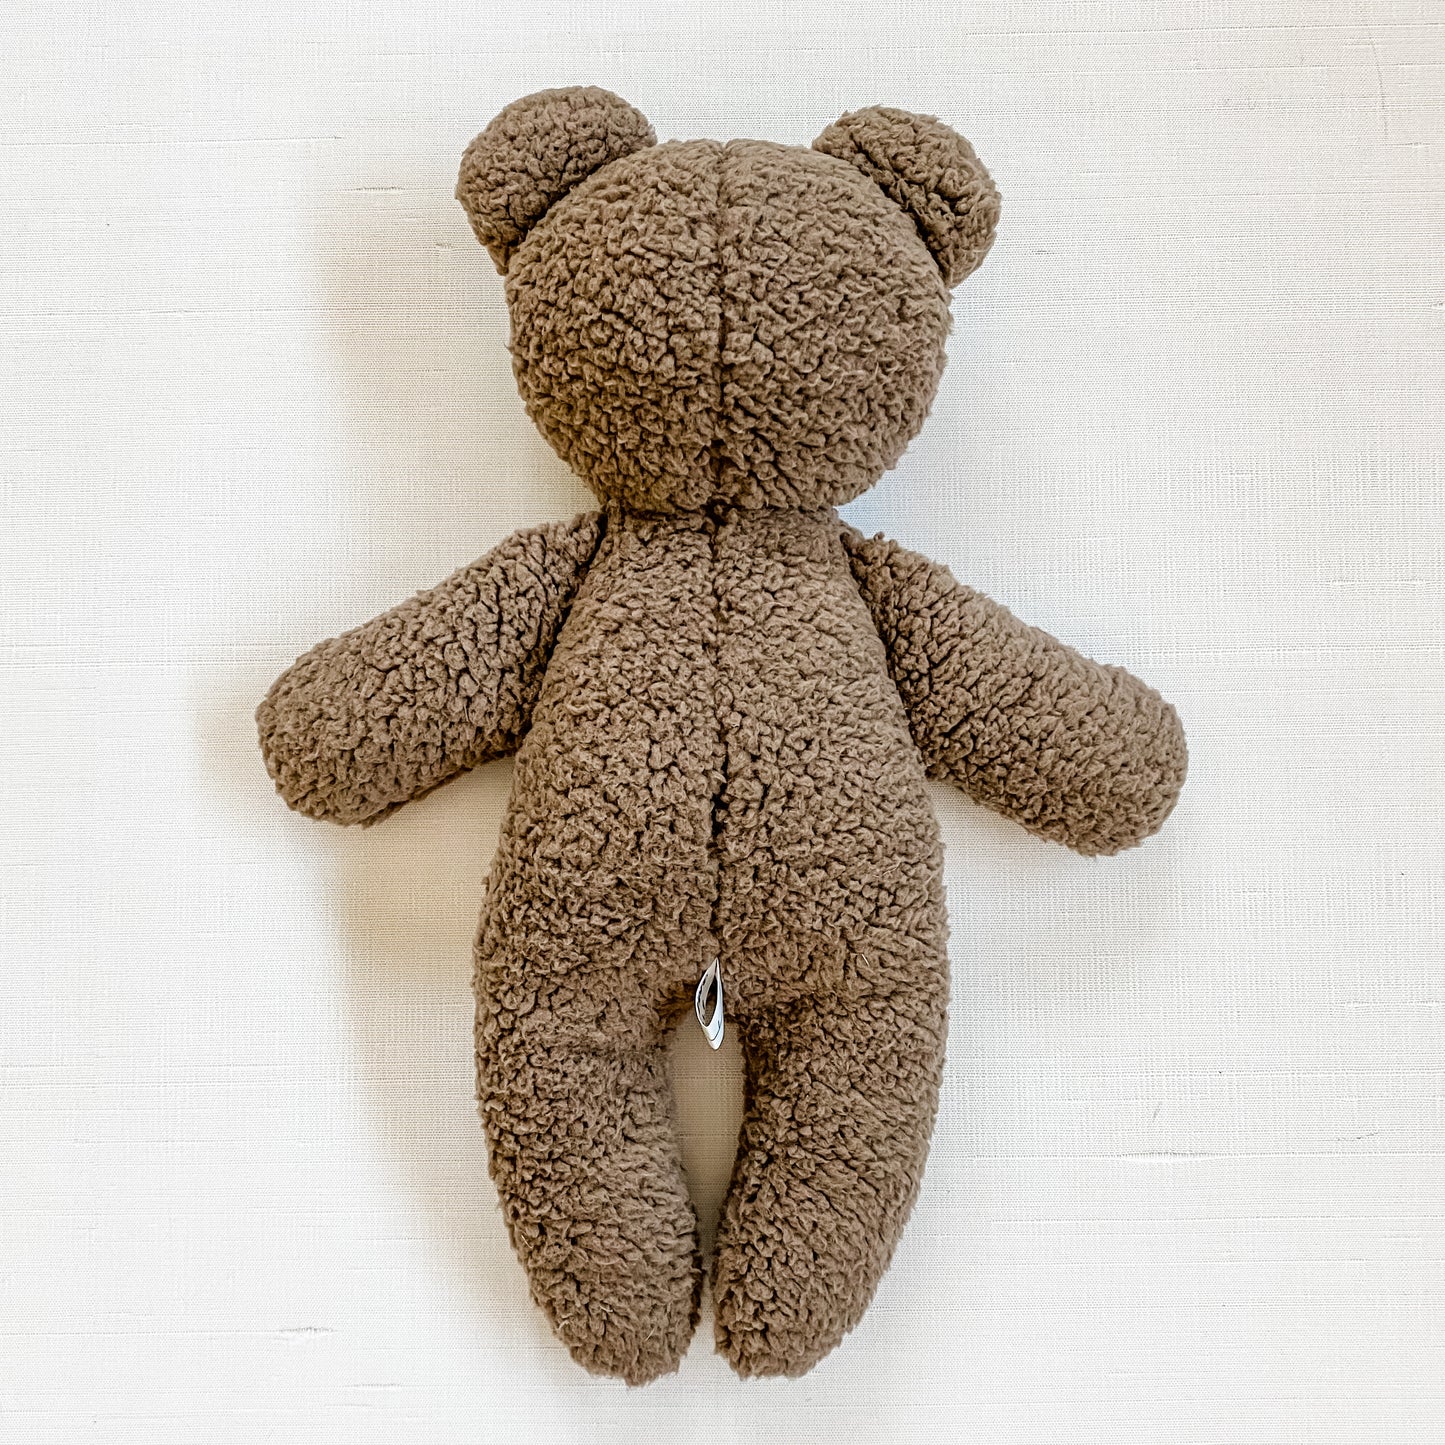 Personalized Blessing Bear™